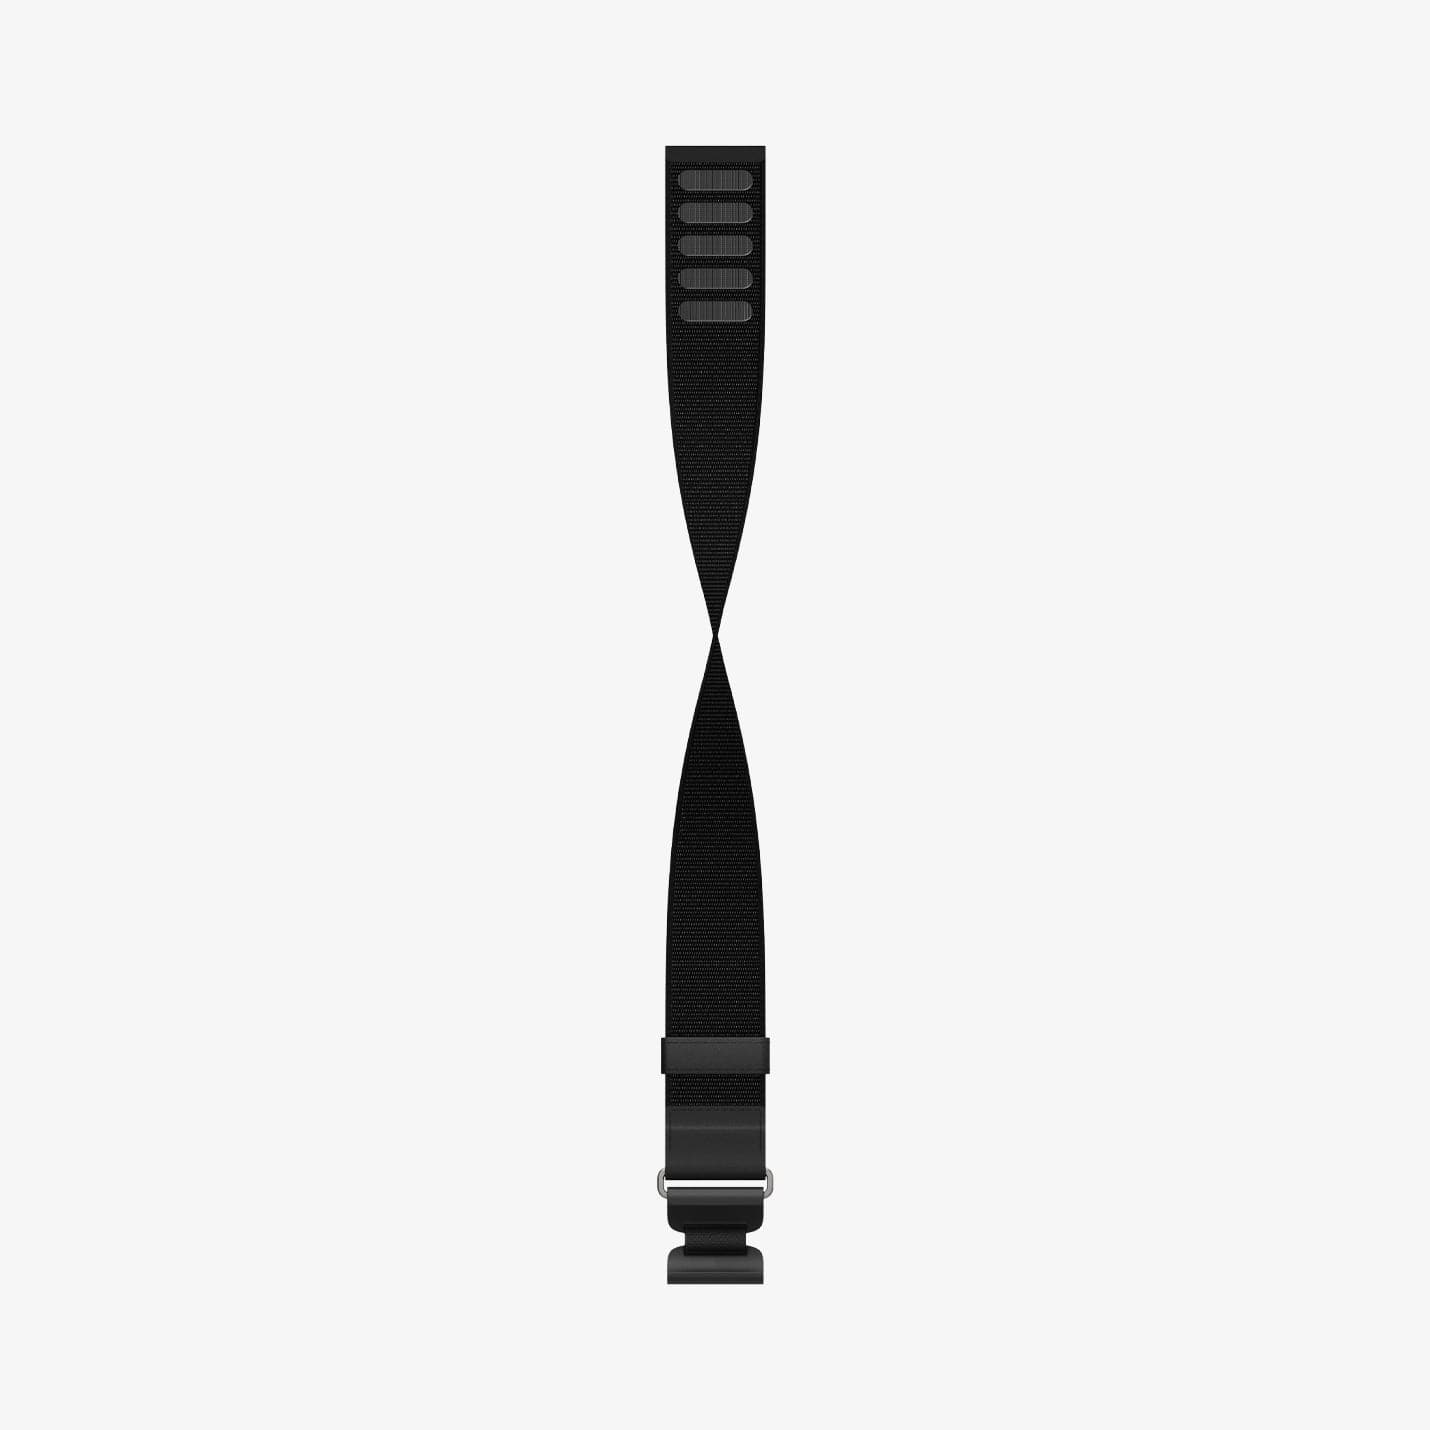 AFA06070 - Meta Quest Pro Head Strap DR200 in black showing the strap twisting to show the durability